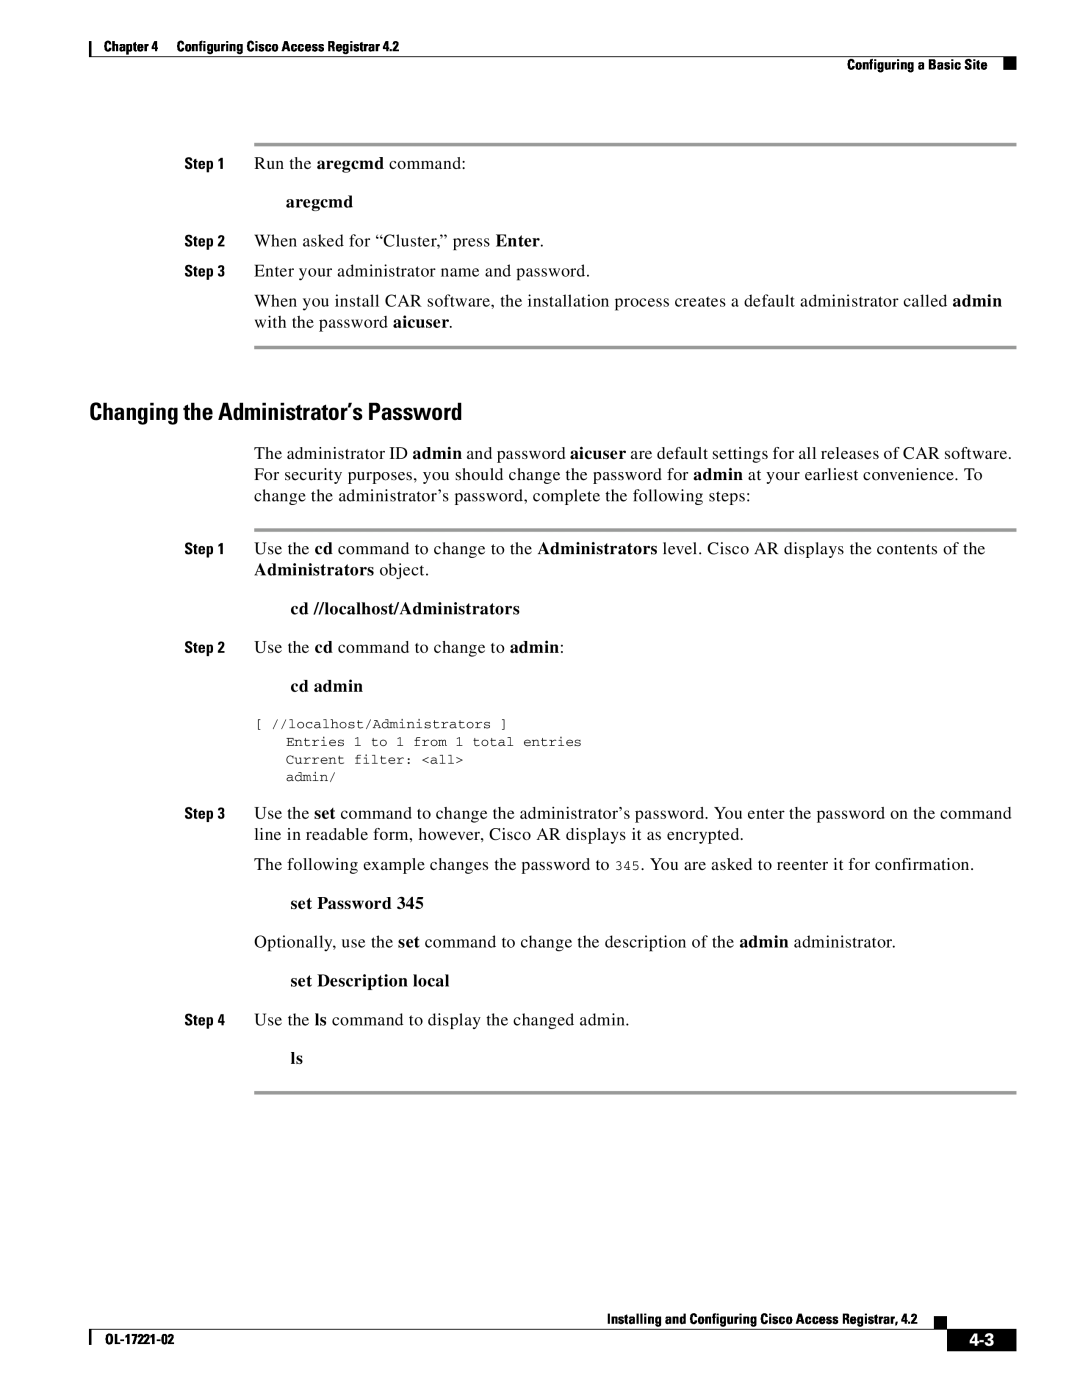 Cisco Systems 4.2 manual Changing the Administrator’s Password, cd //localhost/Administrators, cd admin, set Password 